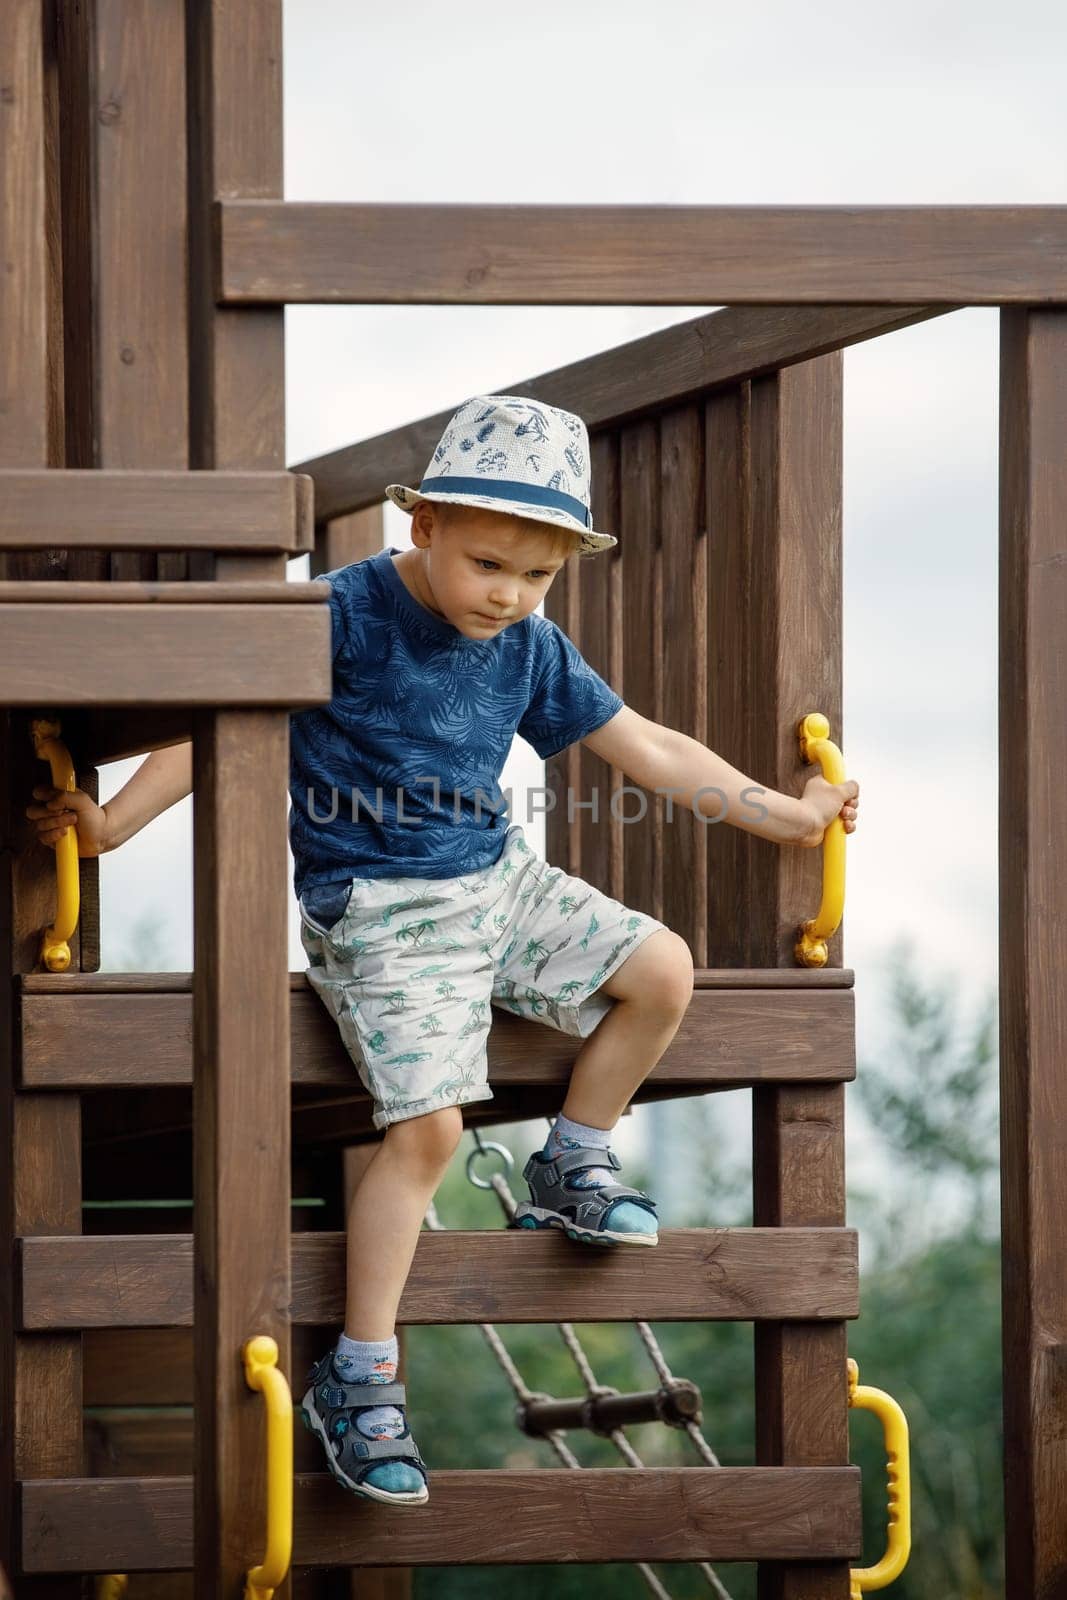 The boy is playing on an outdoor playground, he climbs a wooden ladder dangerously. An active child needs parental care for safety.